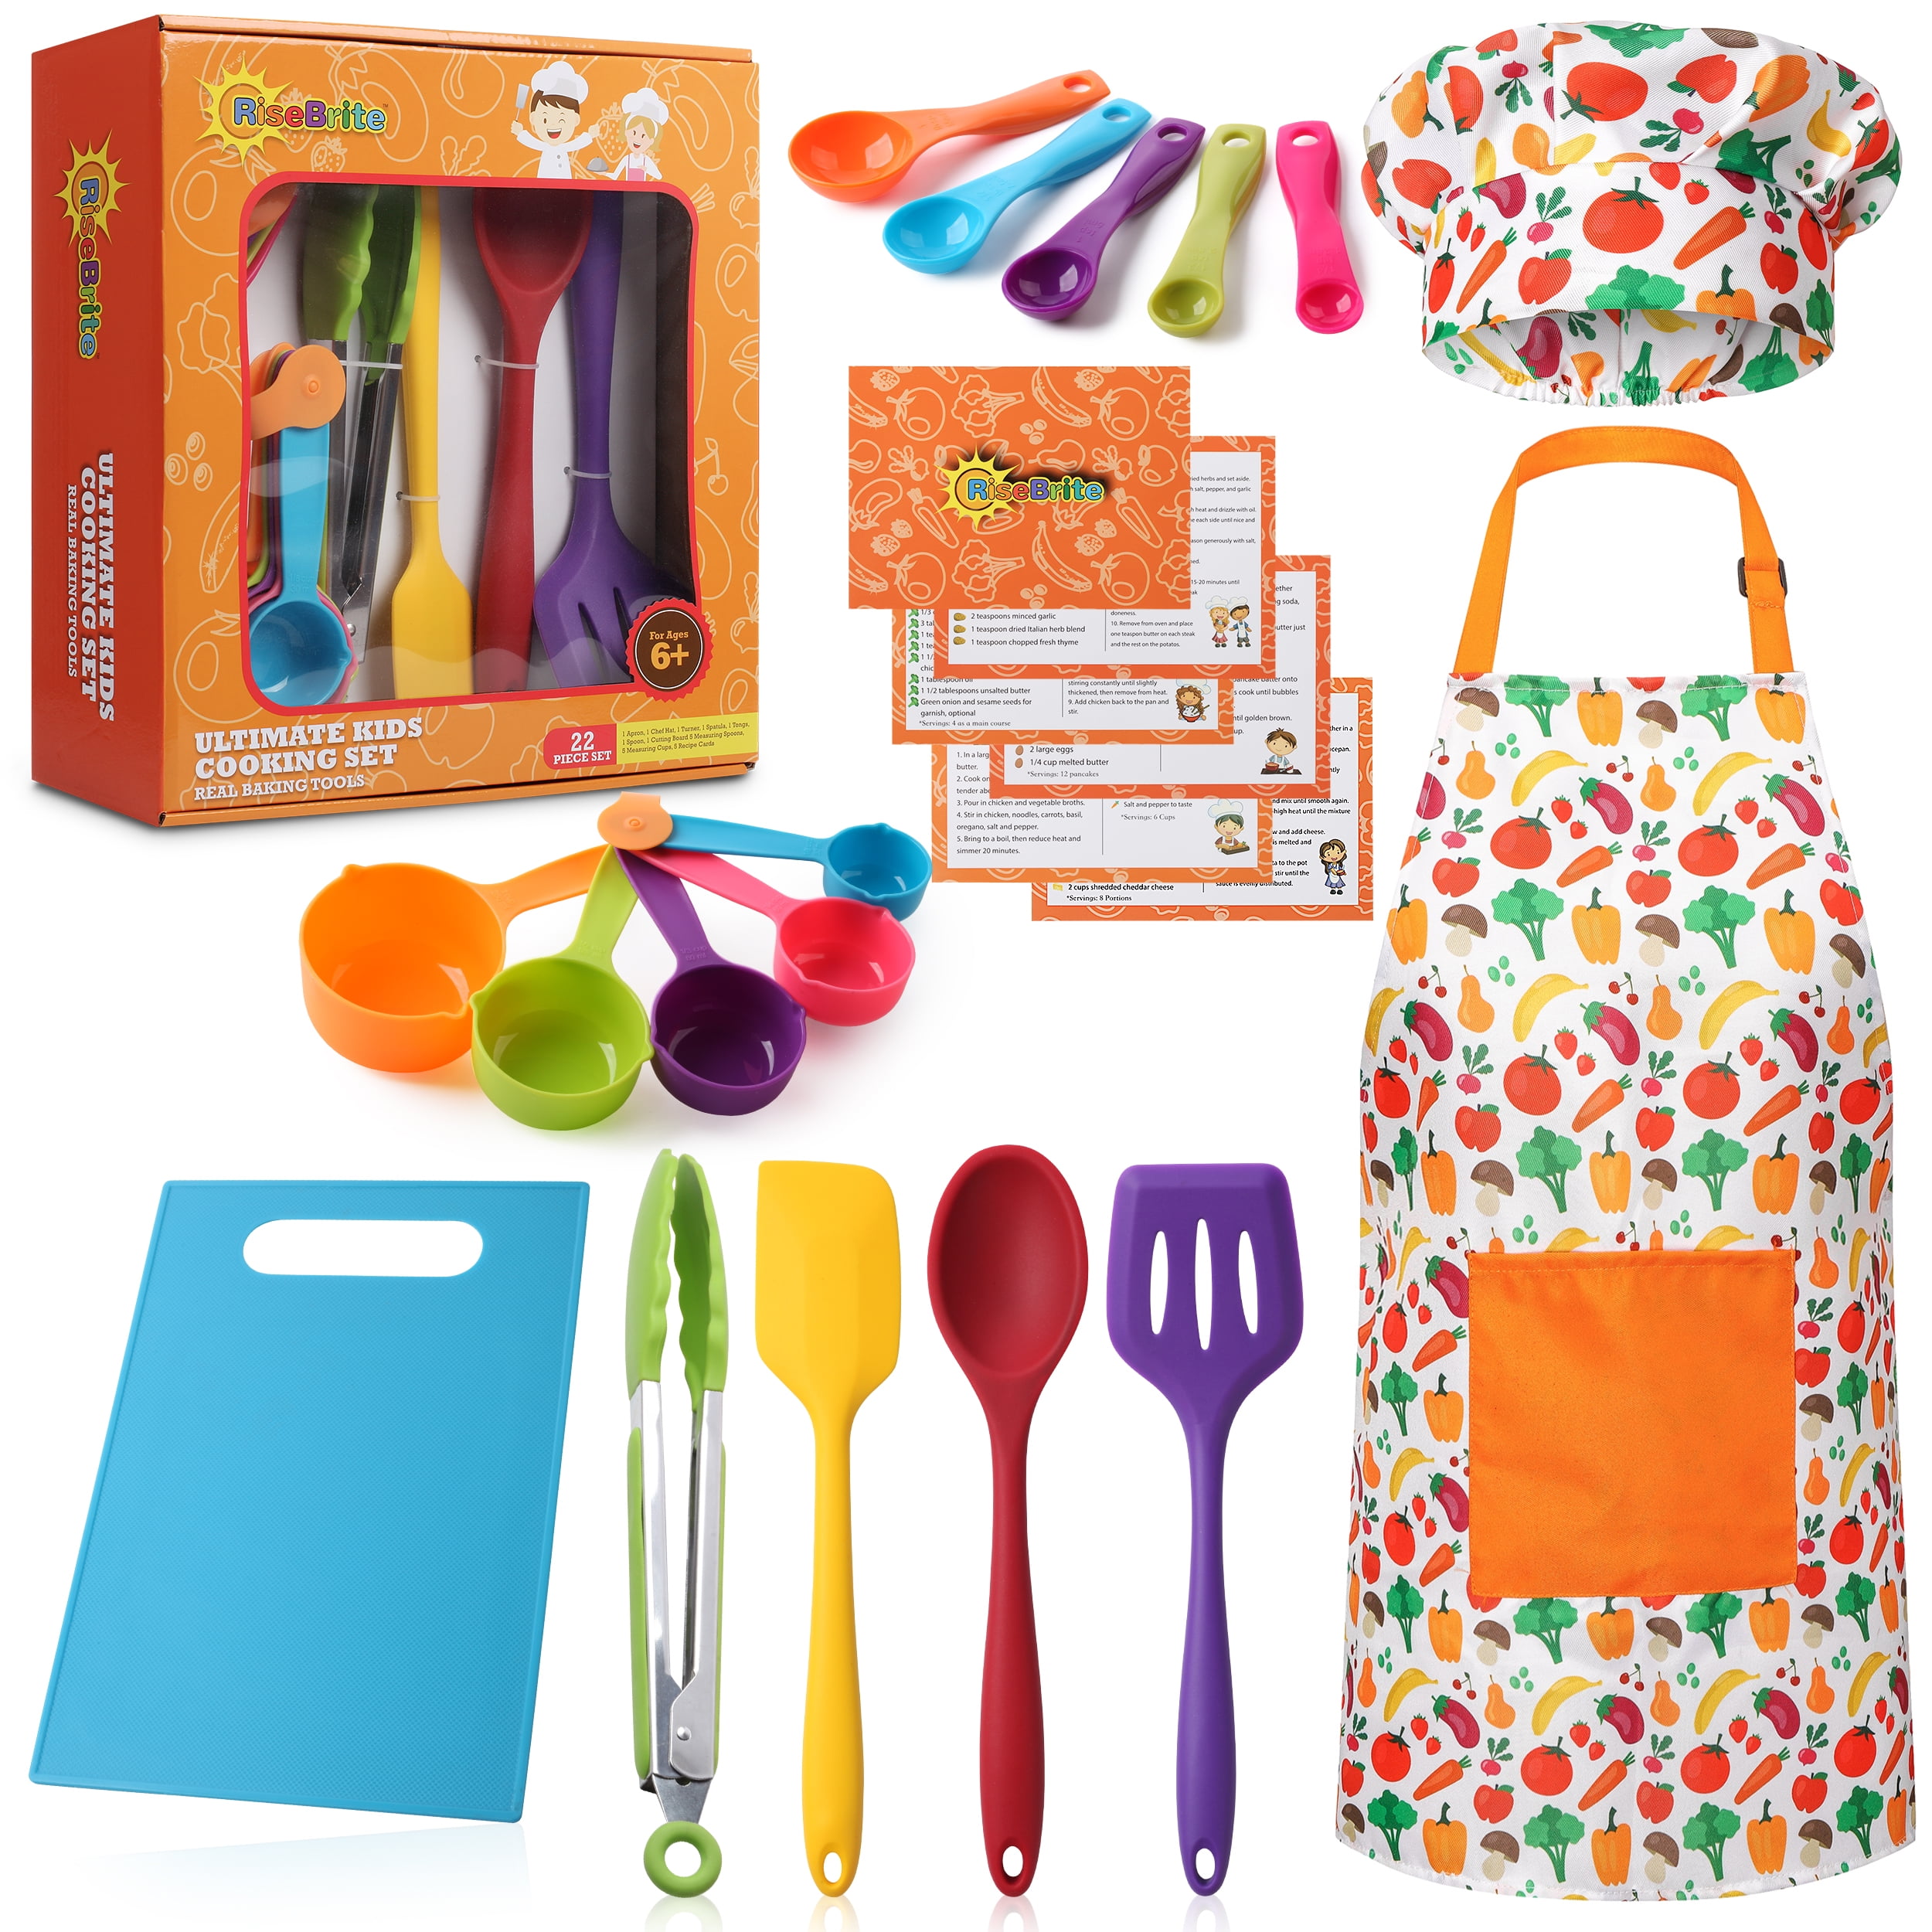 Baking Painting and More RISEBRITE Kids Apron and Chef Hat Set for Girls and Boys for Cooking Gardening 